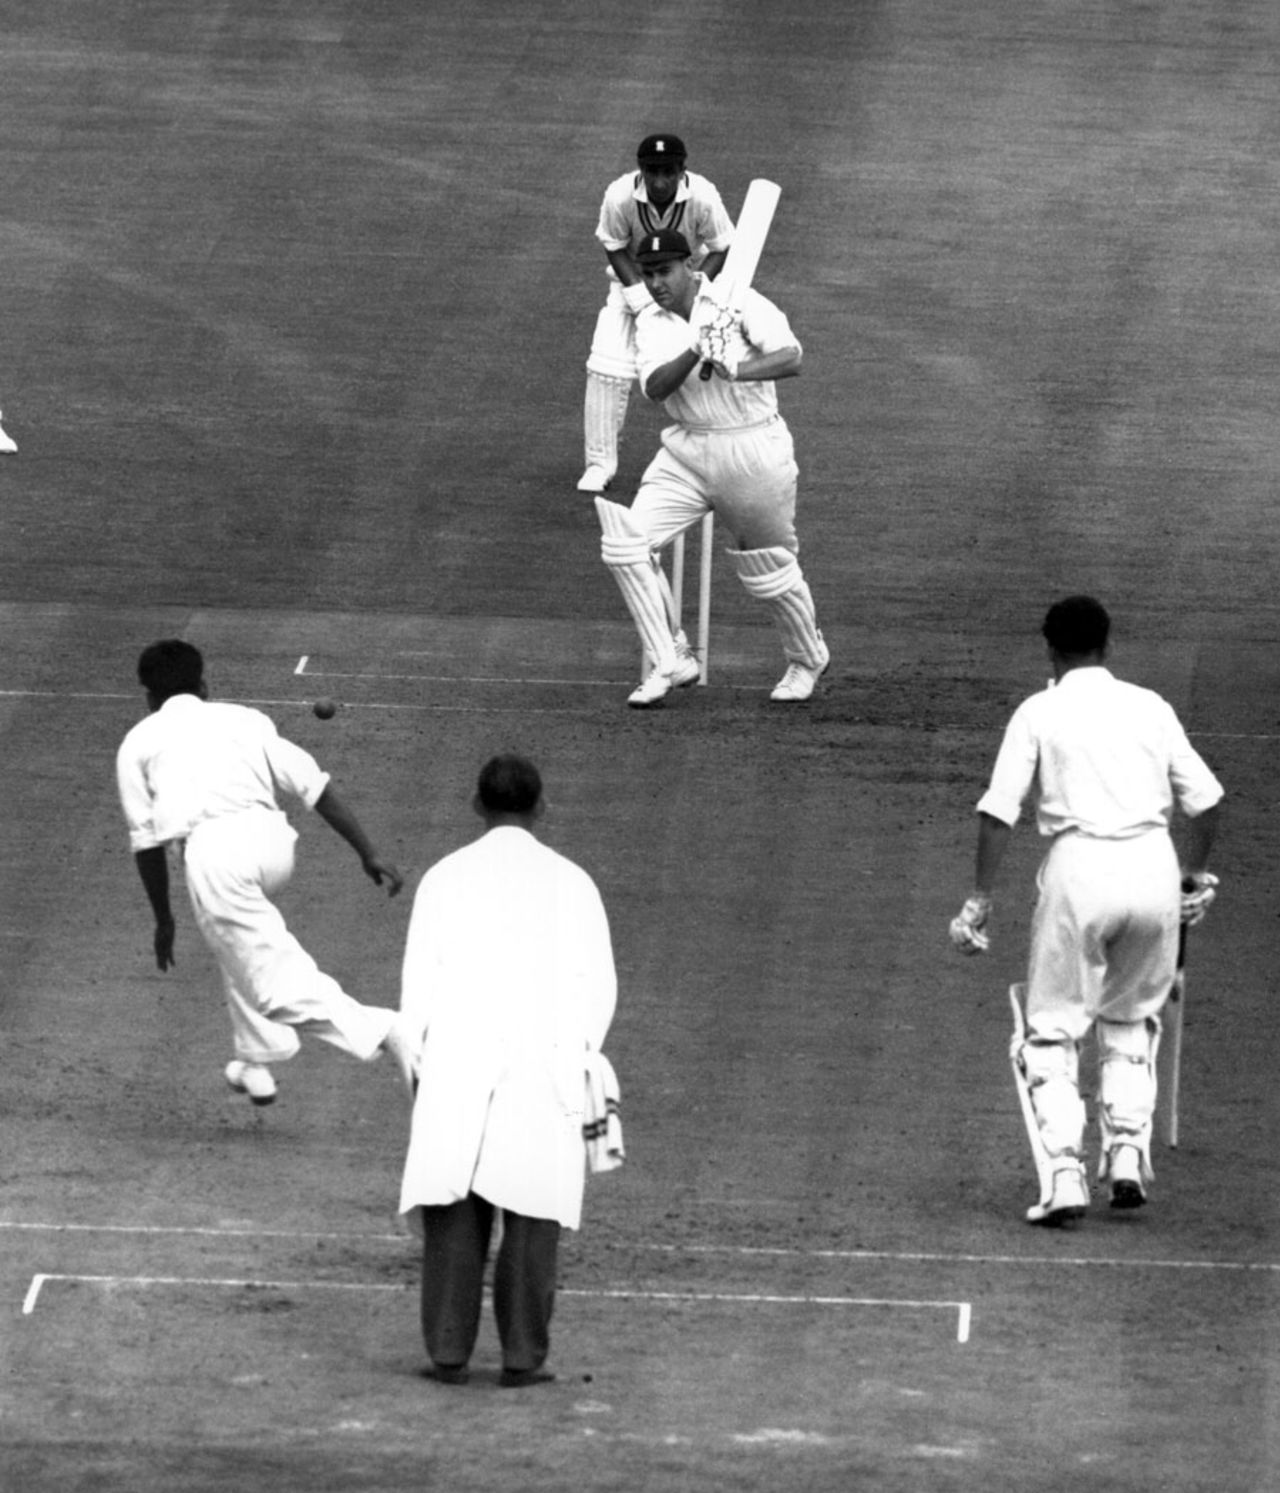 Colin Cowdrey plays one back to the bowler, England v India, 4th Test, Old Trafford, 27 July, 1959